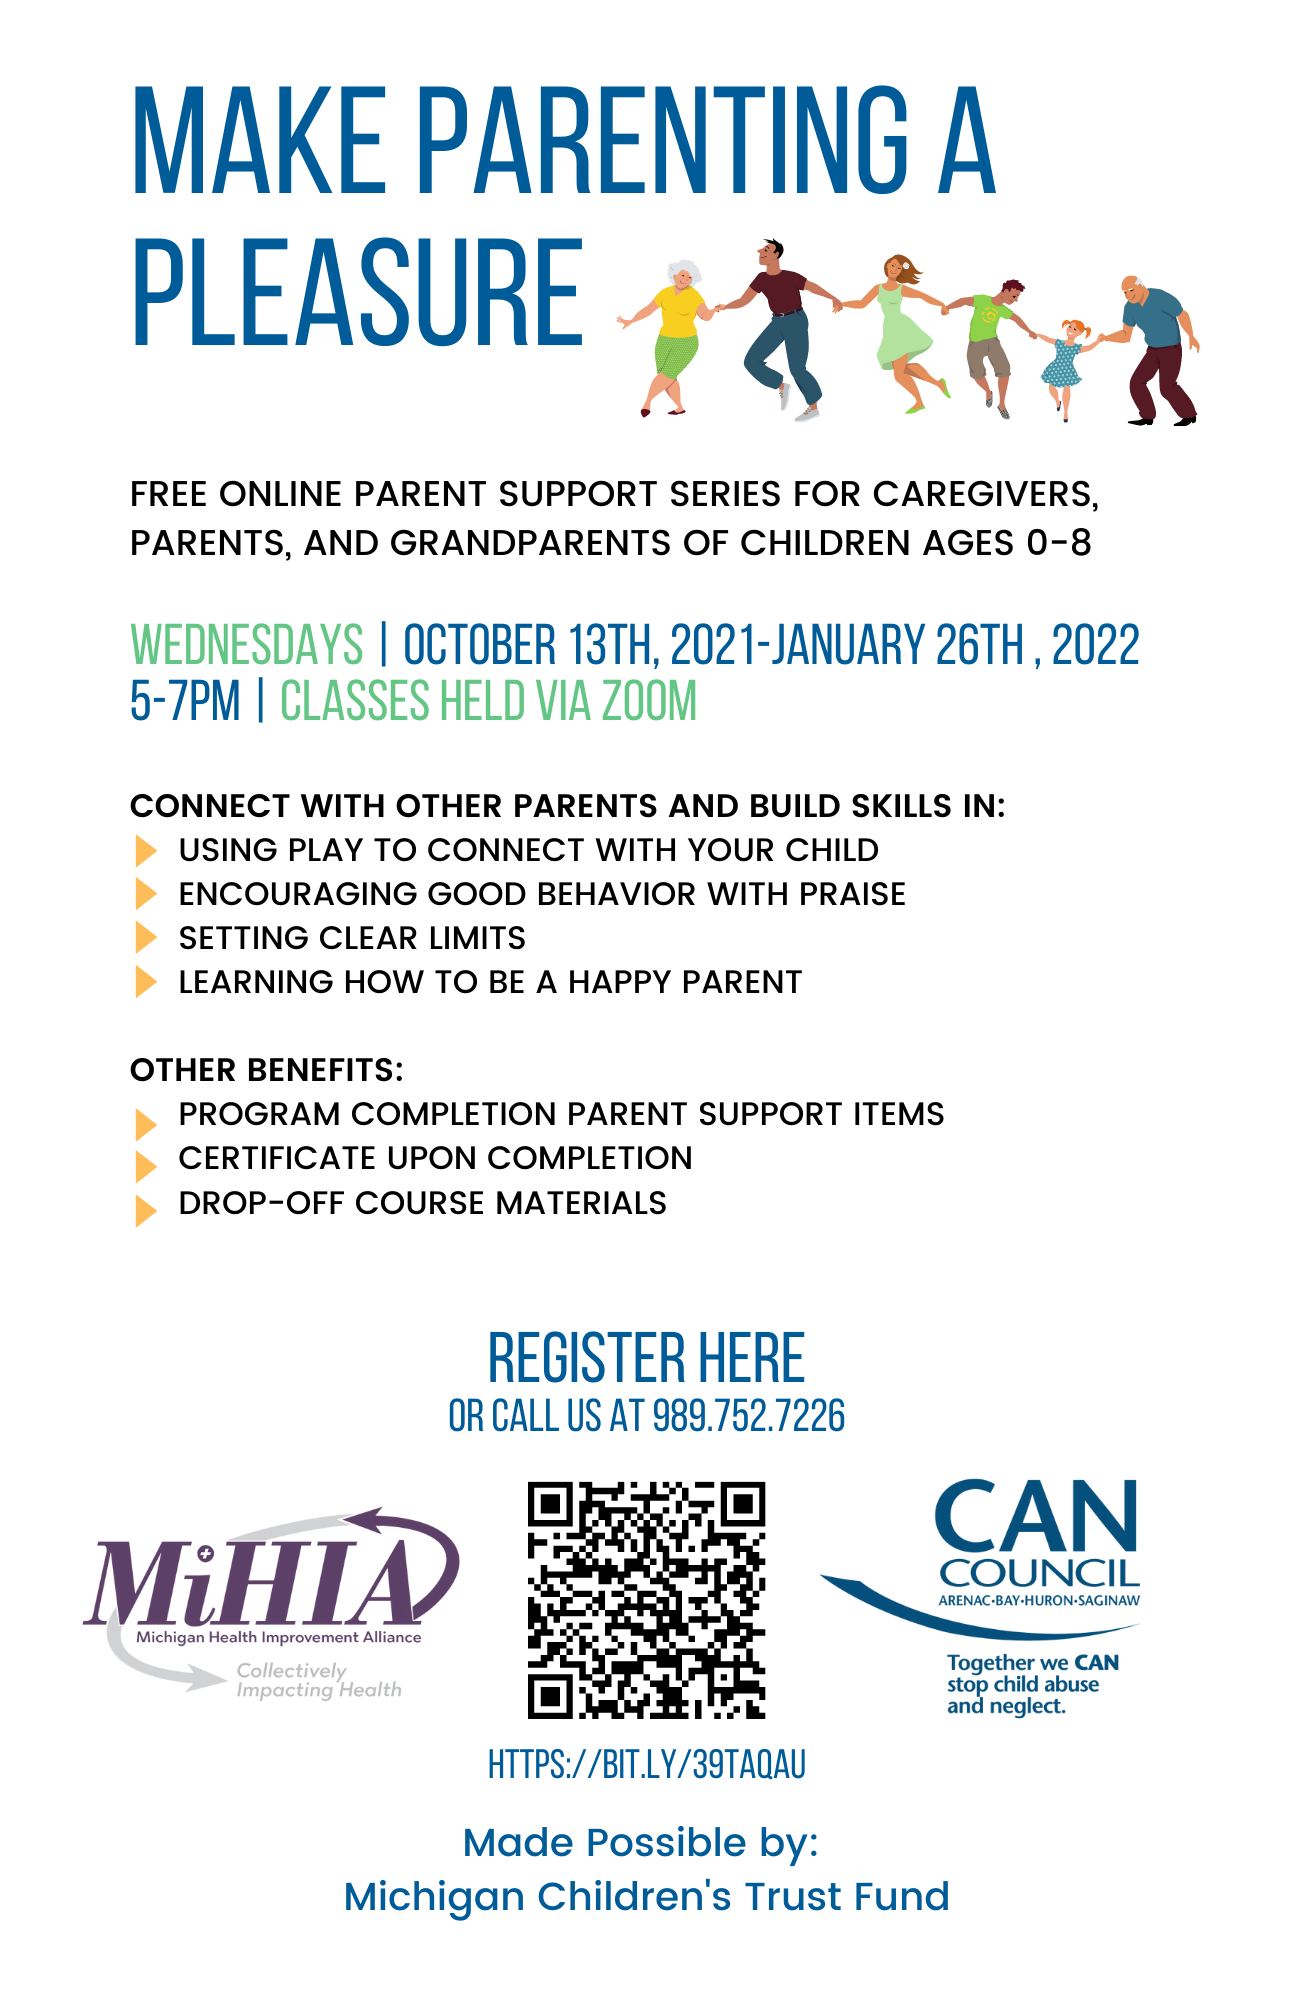 Parenting Class Flyer 2021 – CAN Council